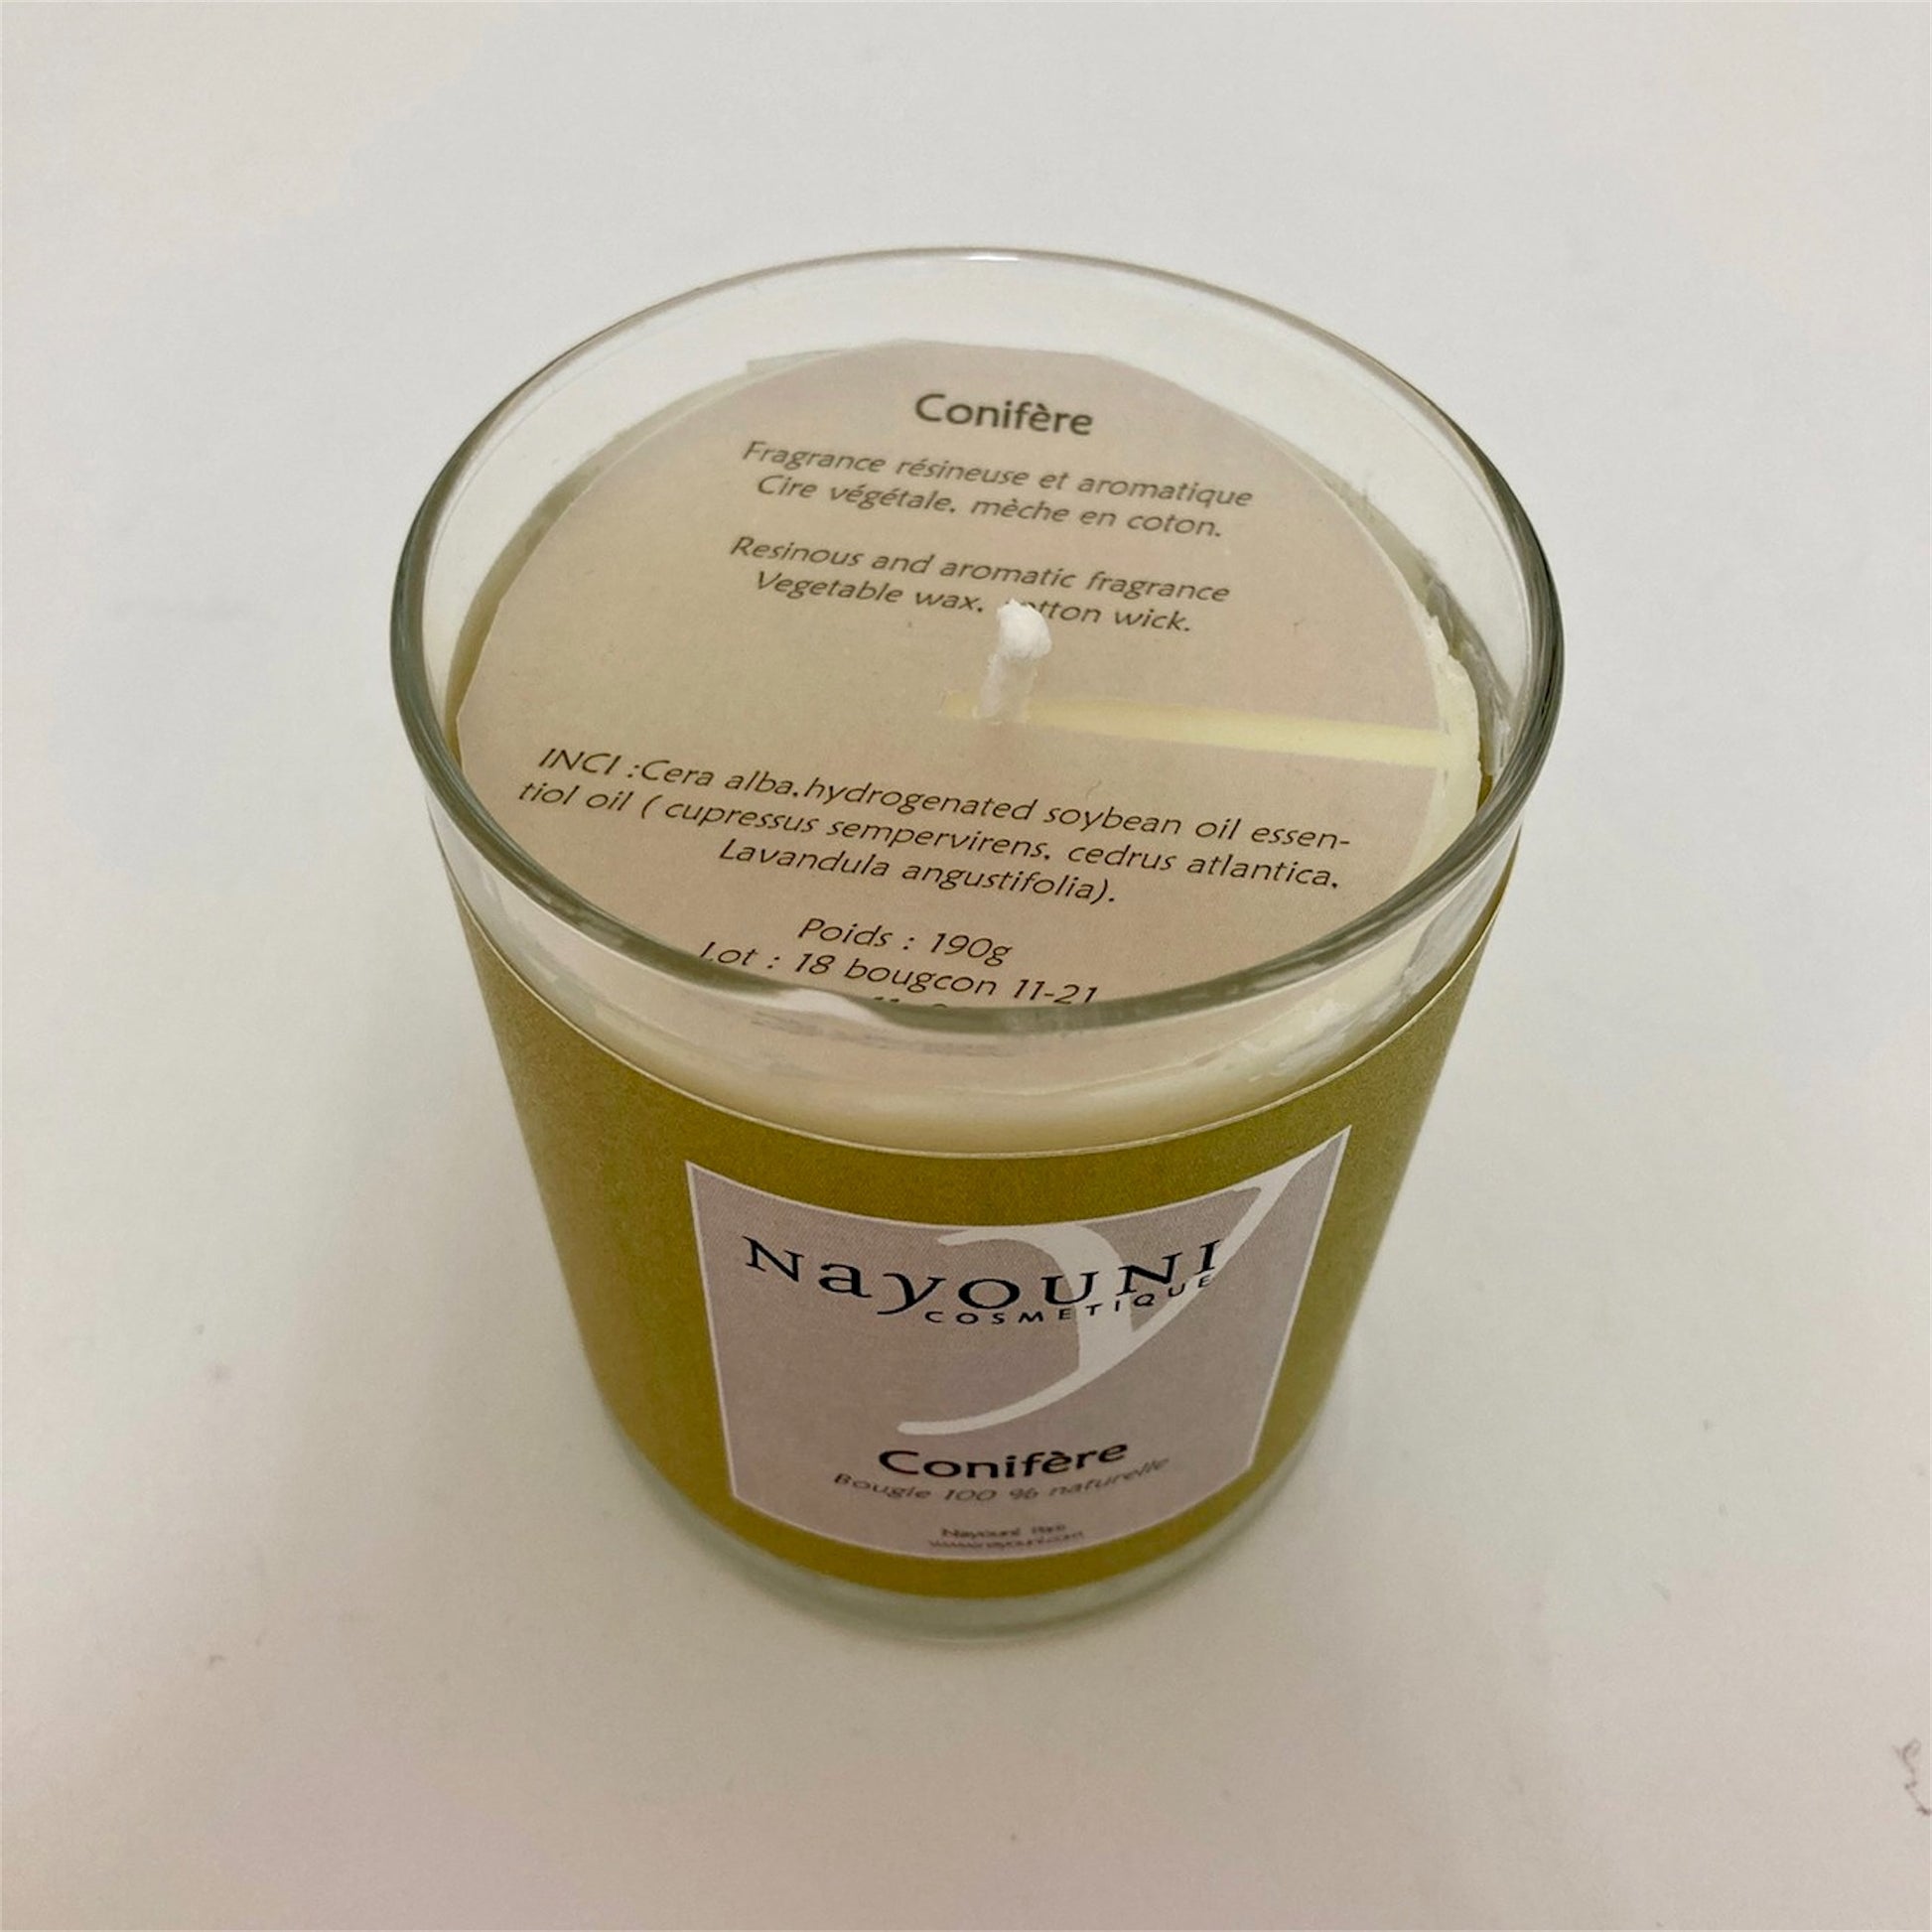 SPECIAL PRICE 【Nayouni 100% Lin】Candle / キャンドル  Conifere